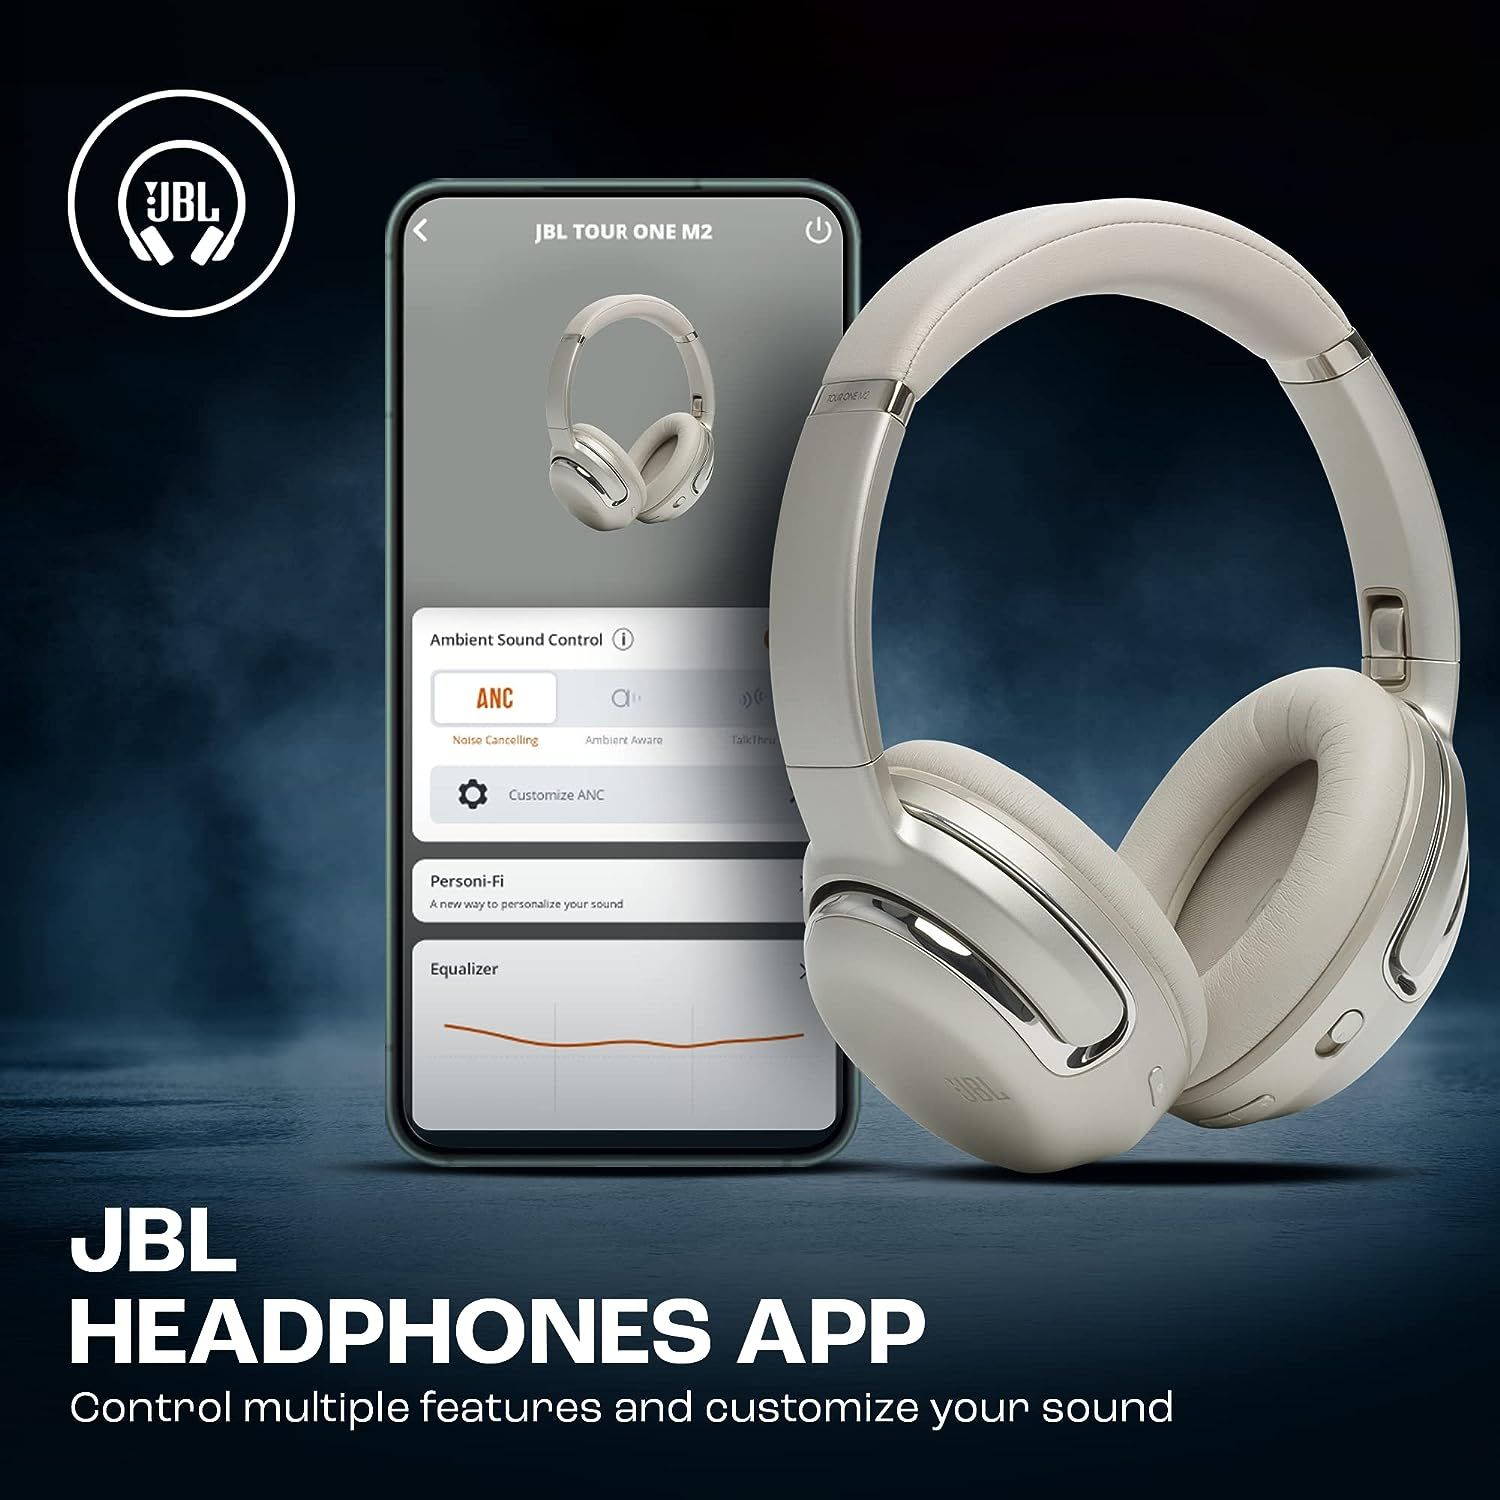 JBL Tour ANC + Over-Ear Dirhami Noise - Wireless Smart One Immersive 4-Mic, Ambient, Spatial Legendary Sound, Cancelling 2.0, Sound, M2 Headphones, Personi-Fi Pro Bluetooth درهمي 